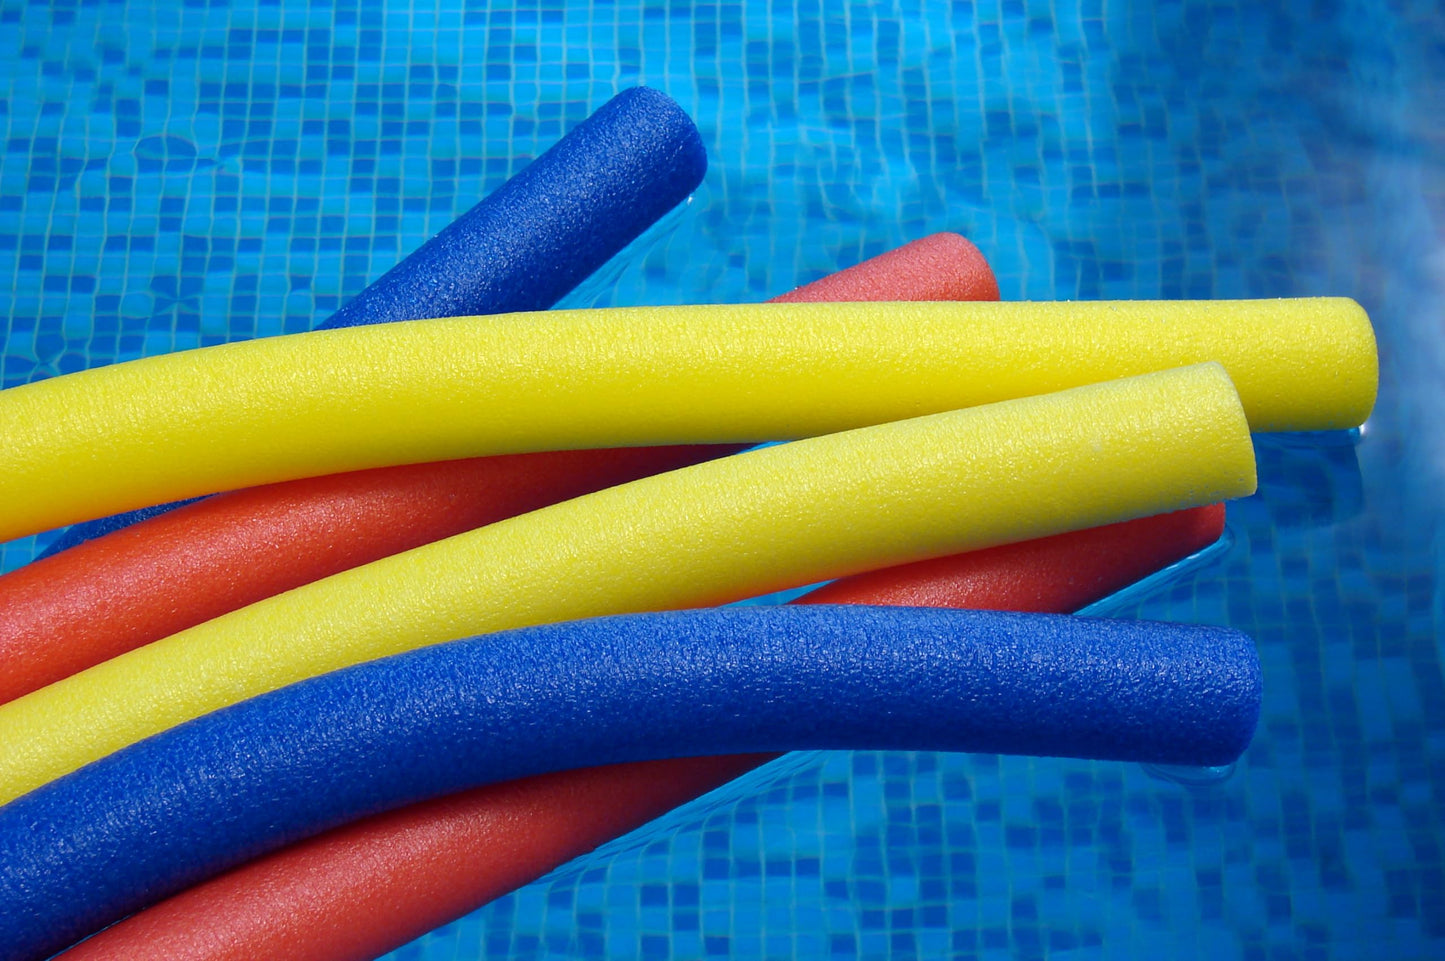 Pool Noodles, Fix Find 5 Pack of 52 Inch Hollow Foam Pool Swim Noodles, Bright Multi-Colored Foam Noodles for Swimming, Floating and Craft Projects